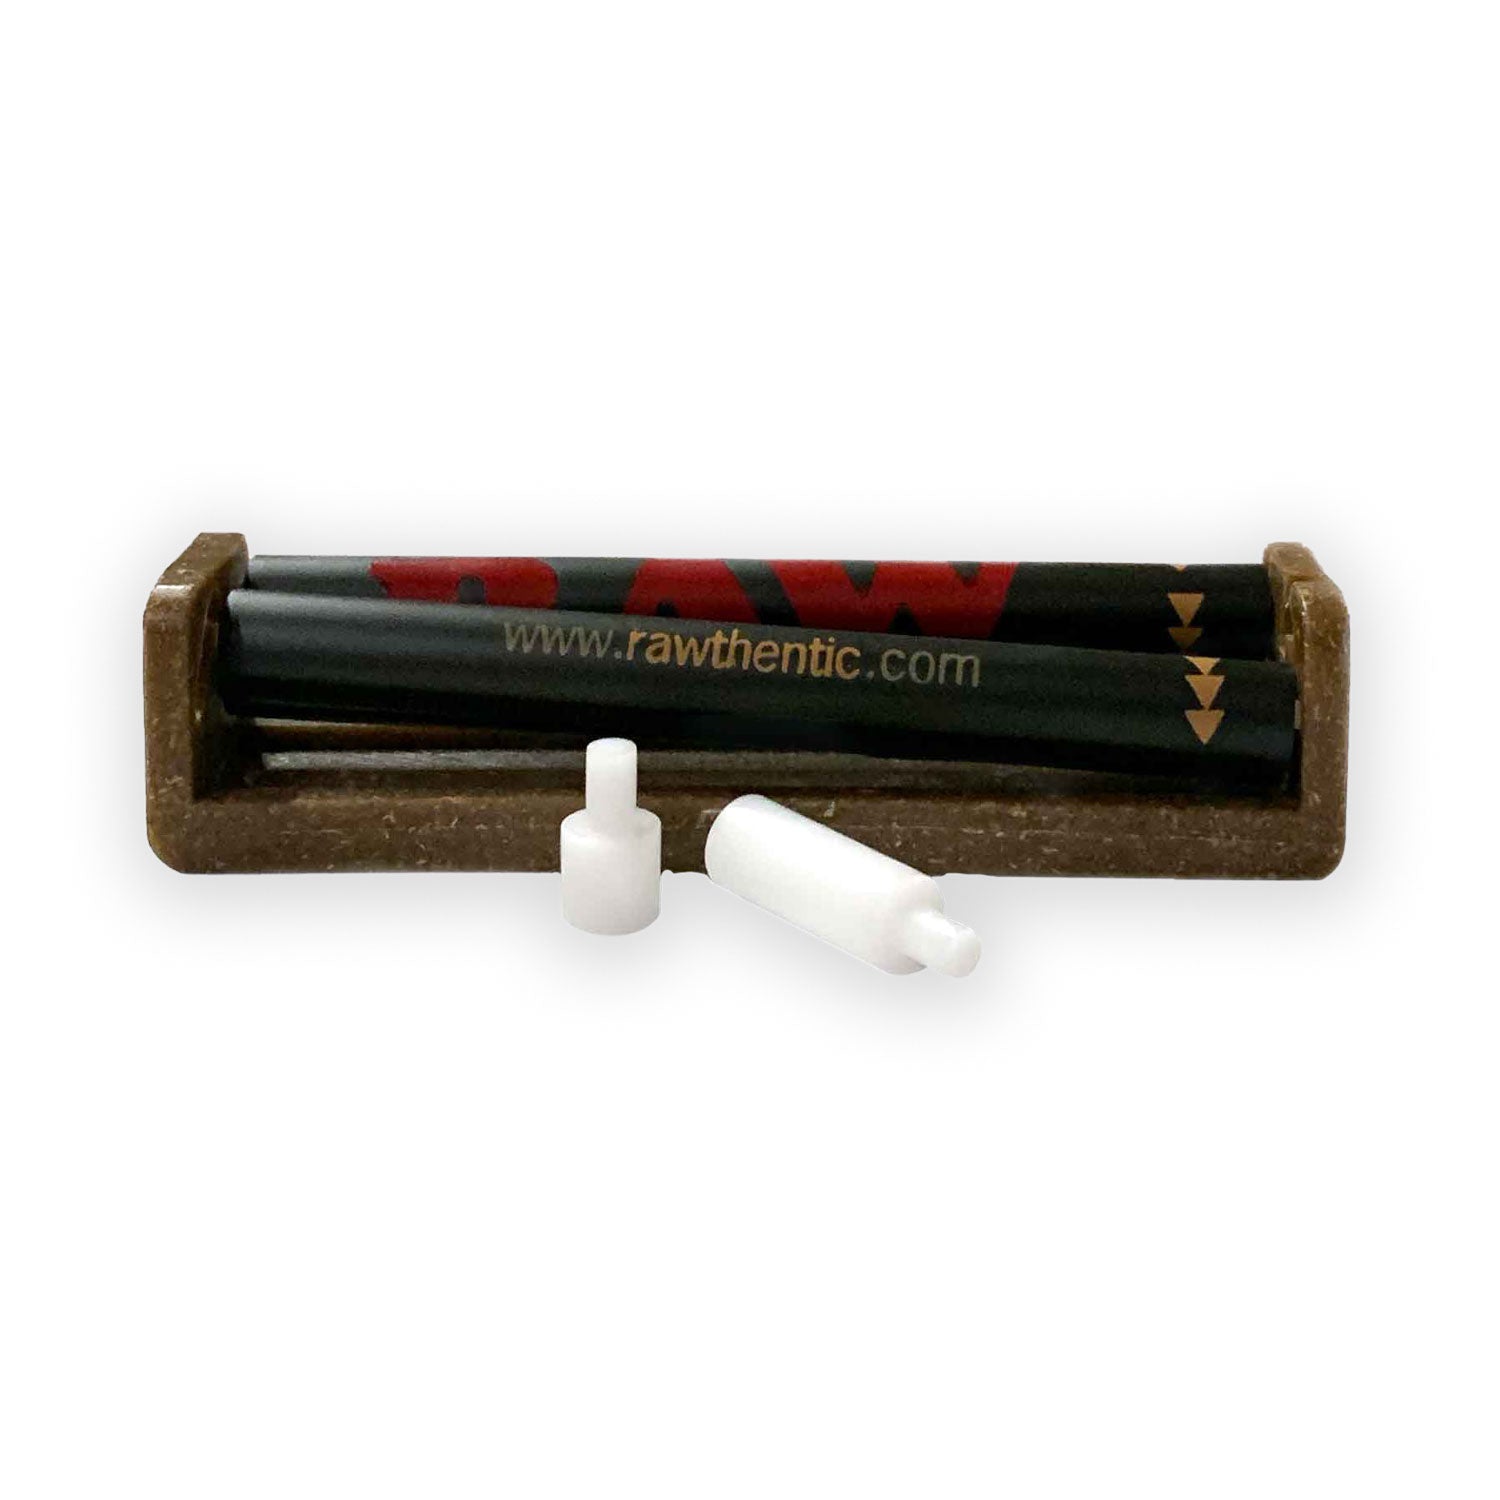 110mm Mini Manual Tobacco Joint Roller Cone Cigarette Rolling